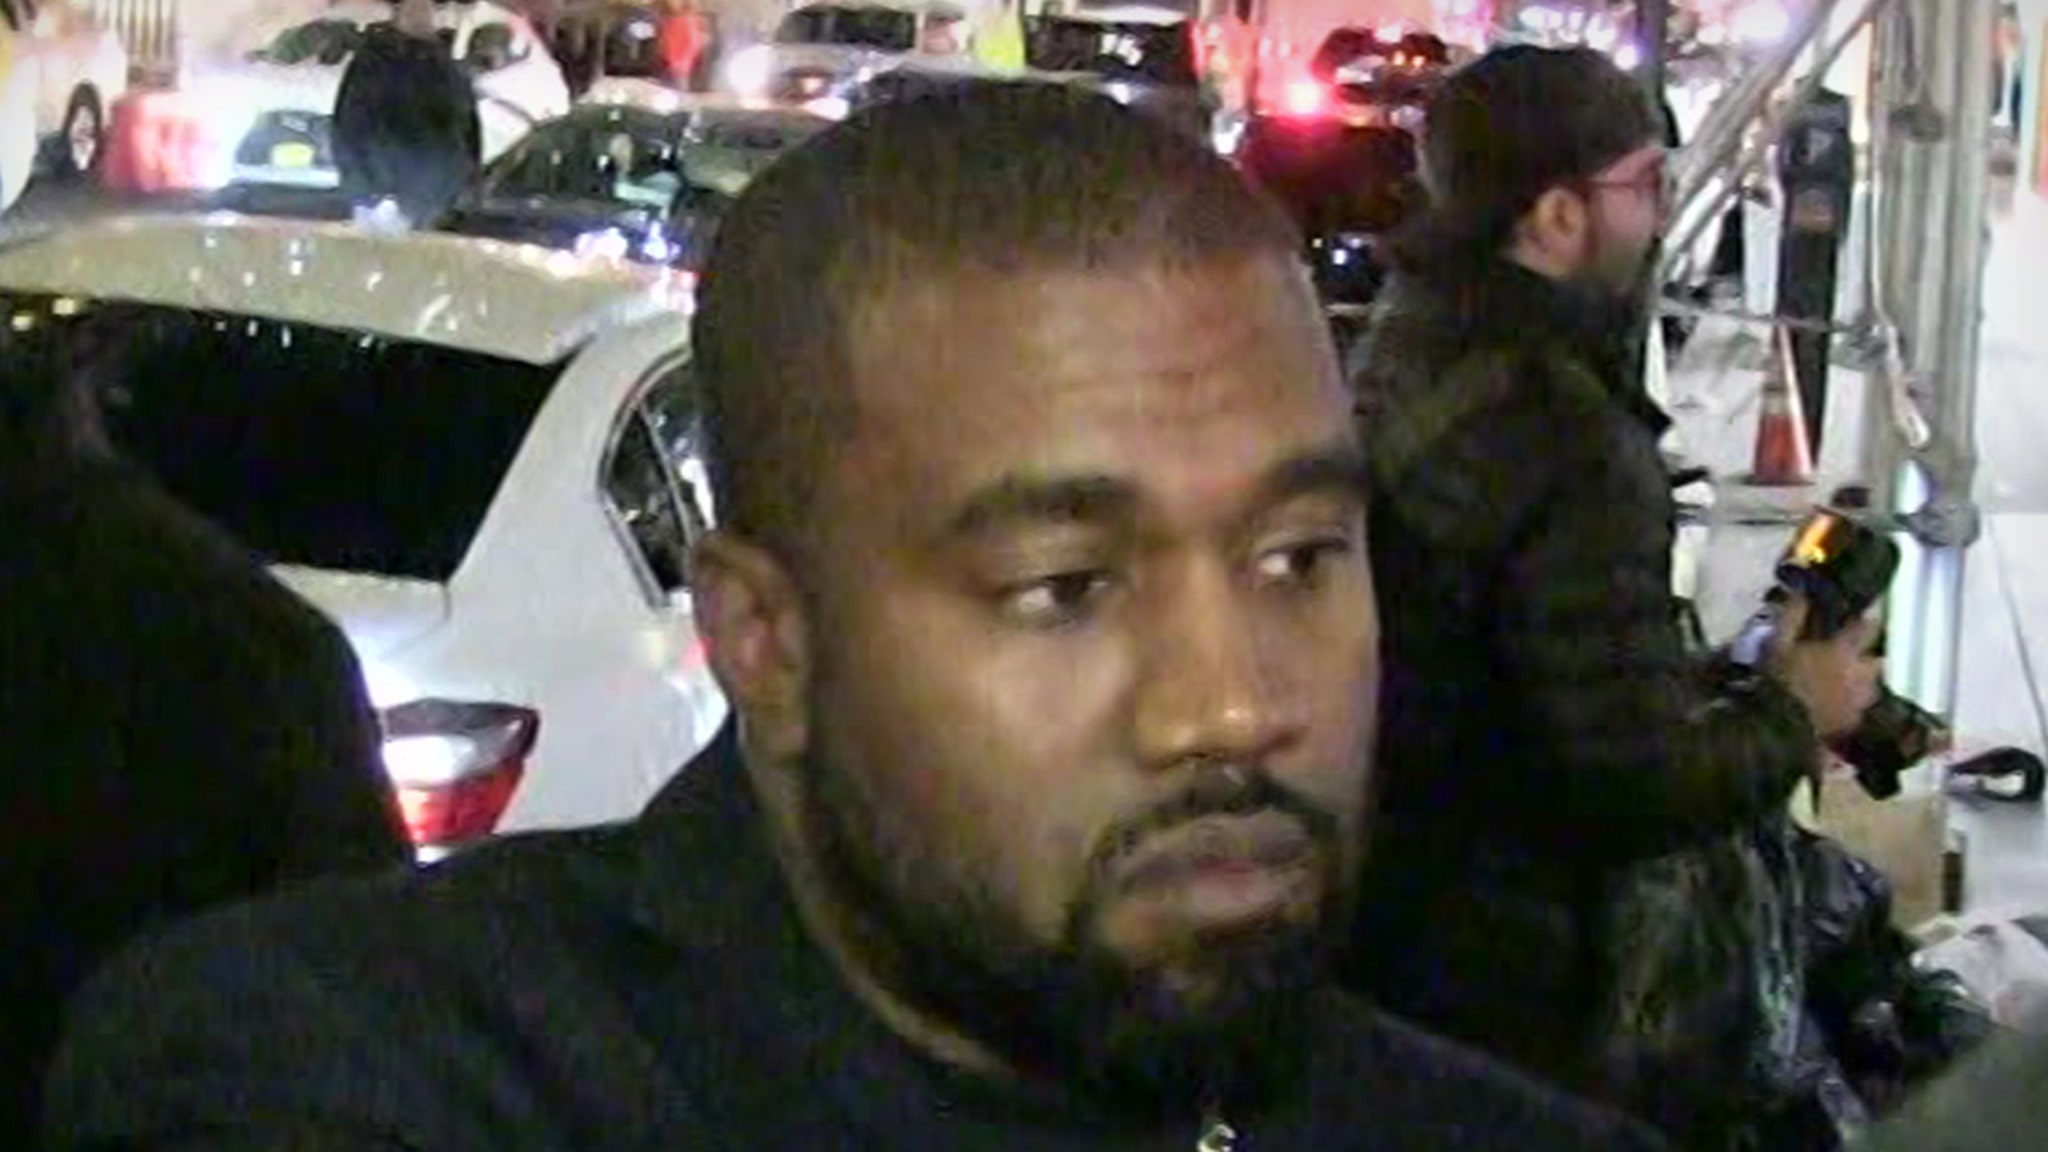 Kanye West Allegedly Evading Ex-Business Manager Who's Suing Him #KanyeWest